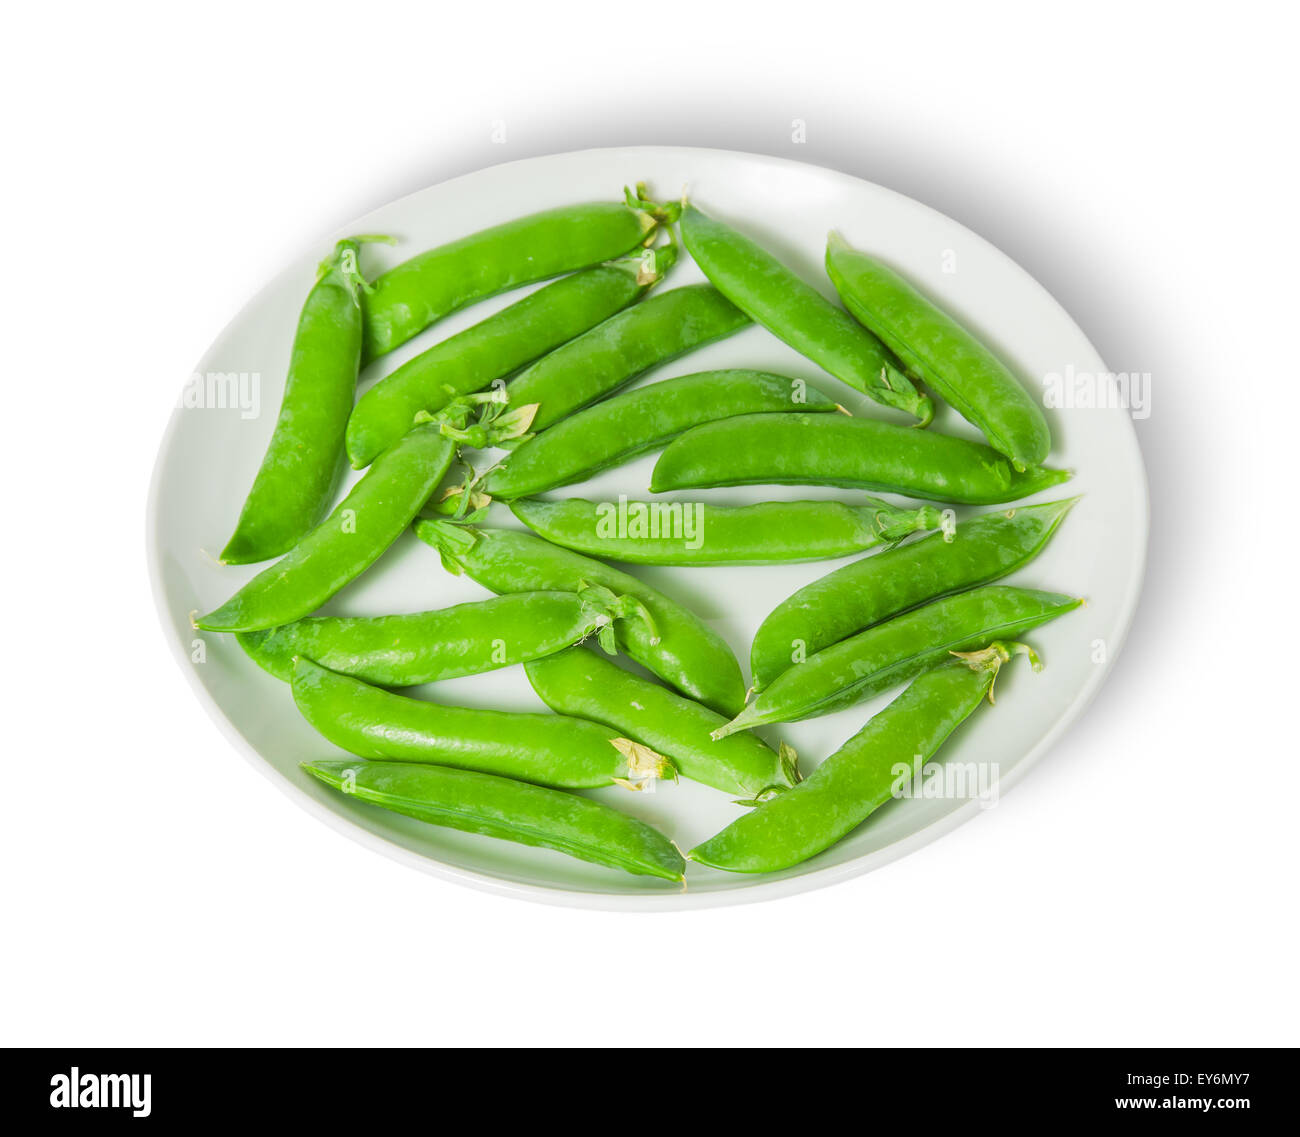 Several pods of peas on a white plate isolated on white background Stock Photo